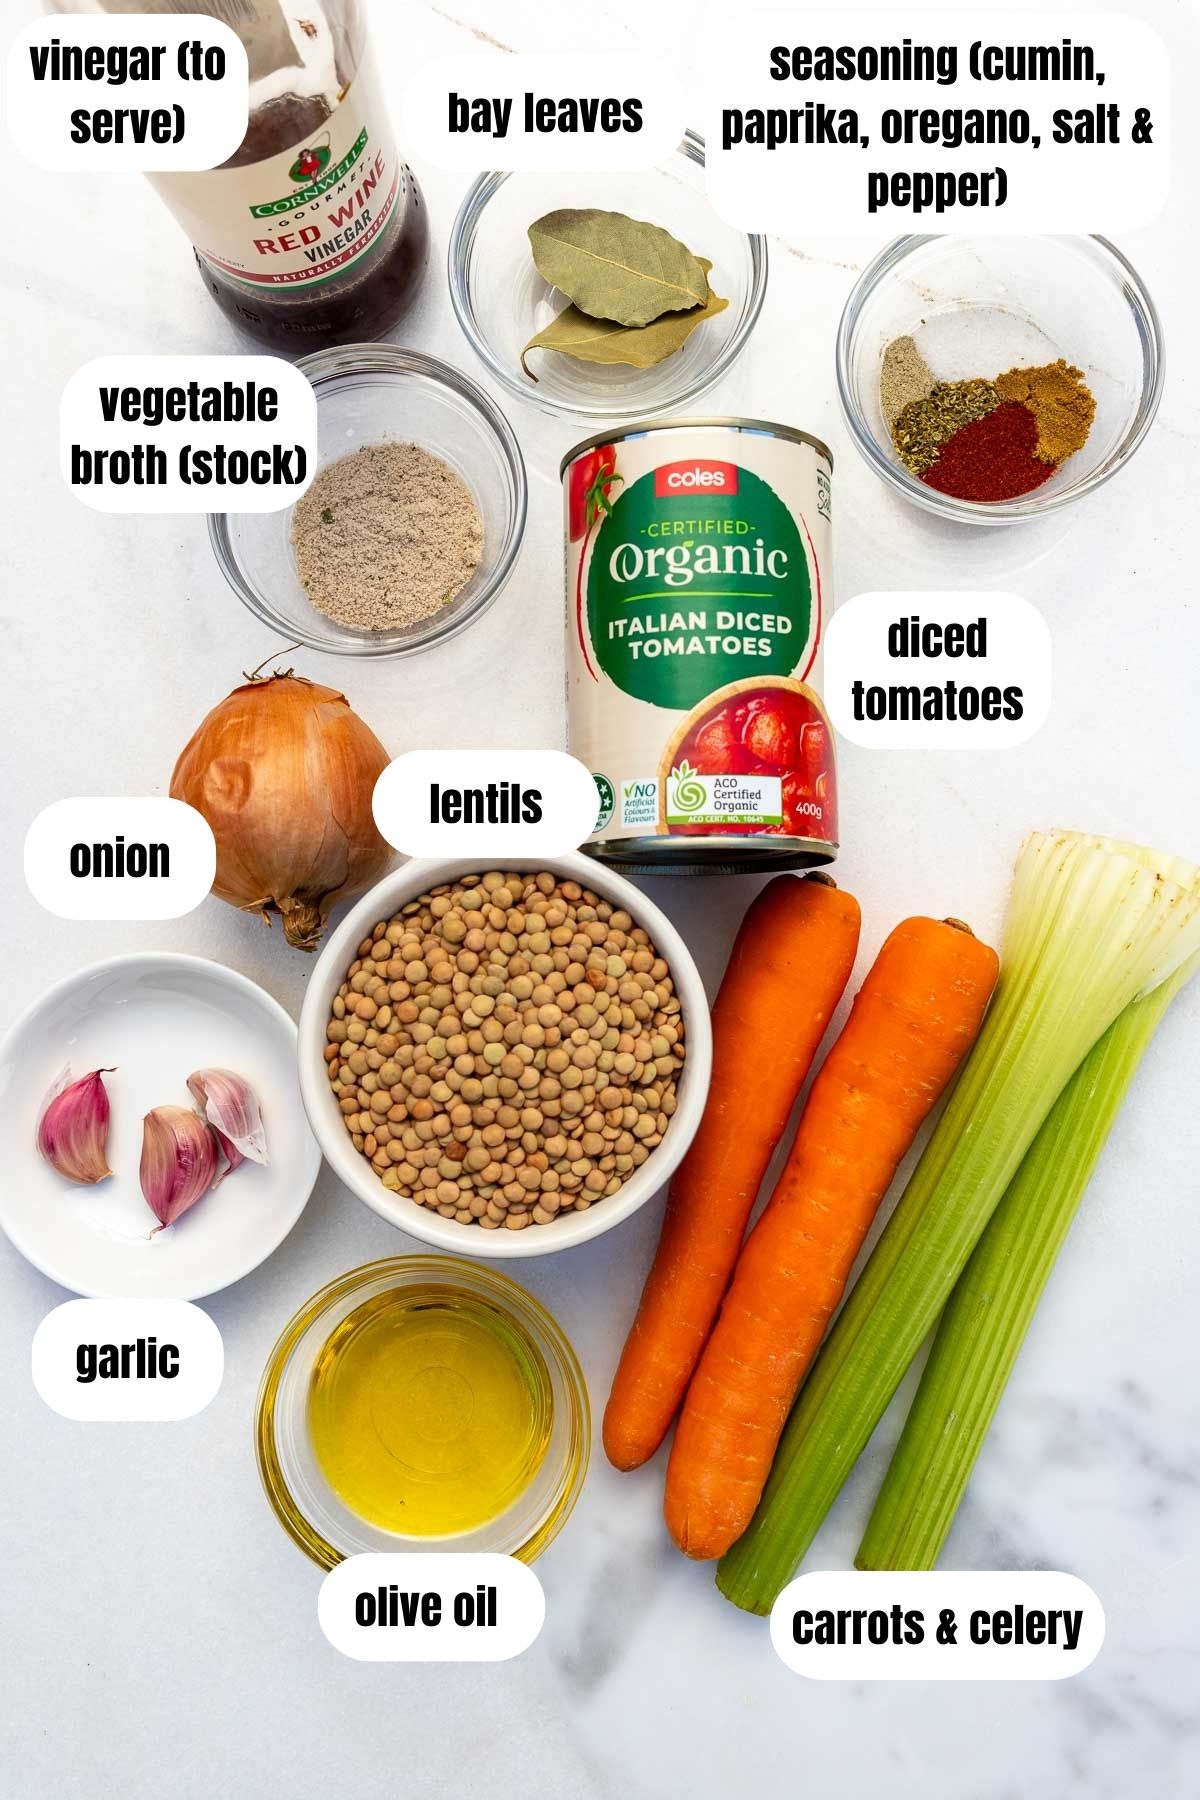 All labelled ingredients for Greek lentil soup including lentils, olive oil, carrots and celery, garlic, seasoning, bay leaves, broth, garlic, diced tomatoes and vinegar to serve.